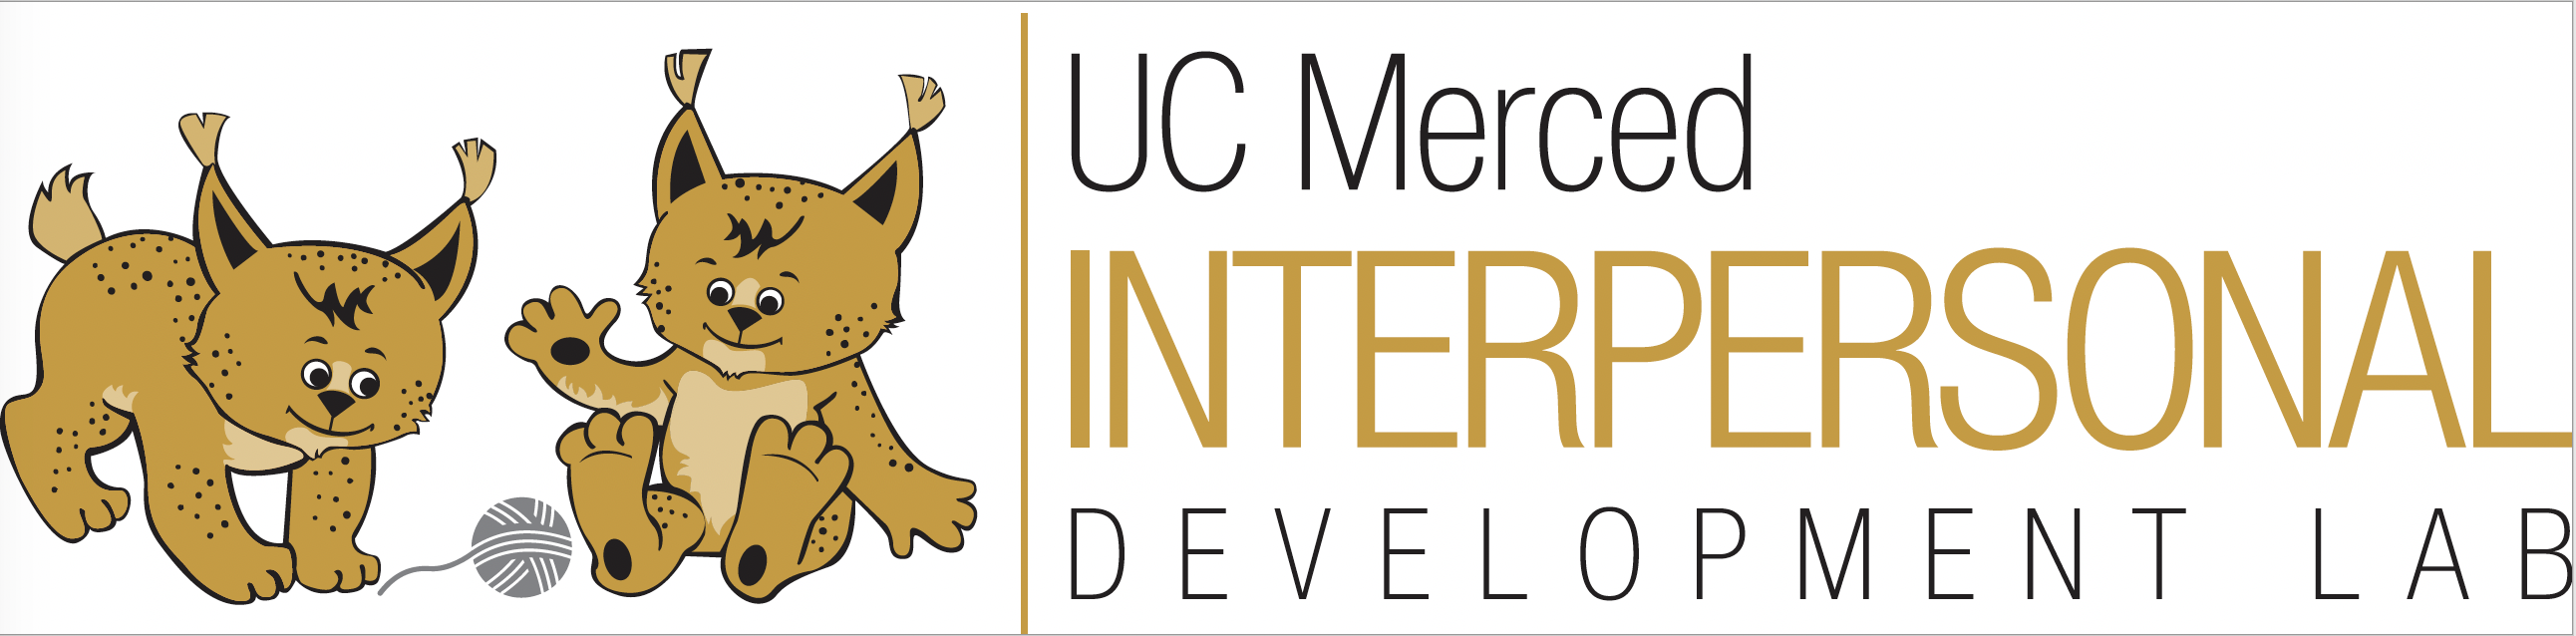 The logo for the Interpersonal Development Lab. It shows two baby bobcats playing together with a ball of string.